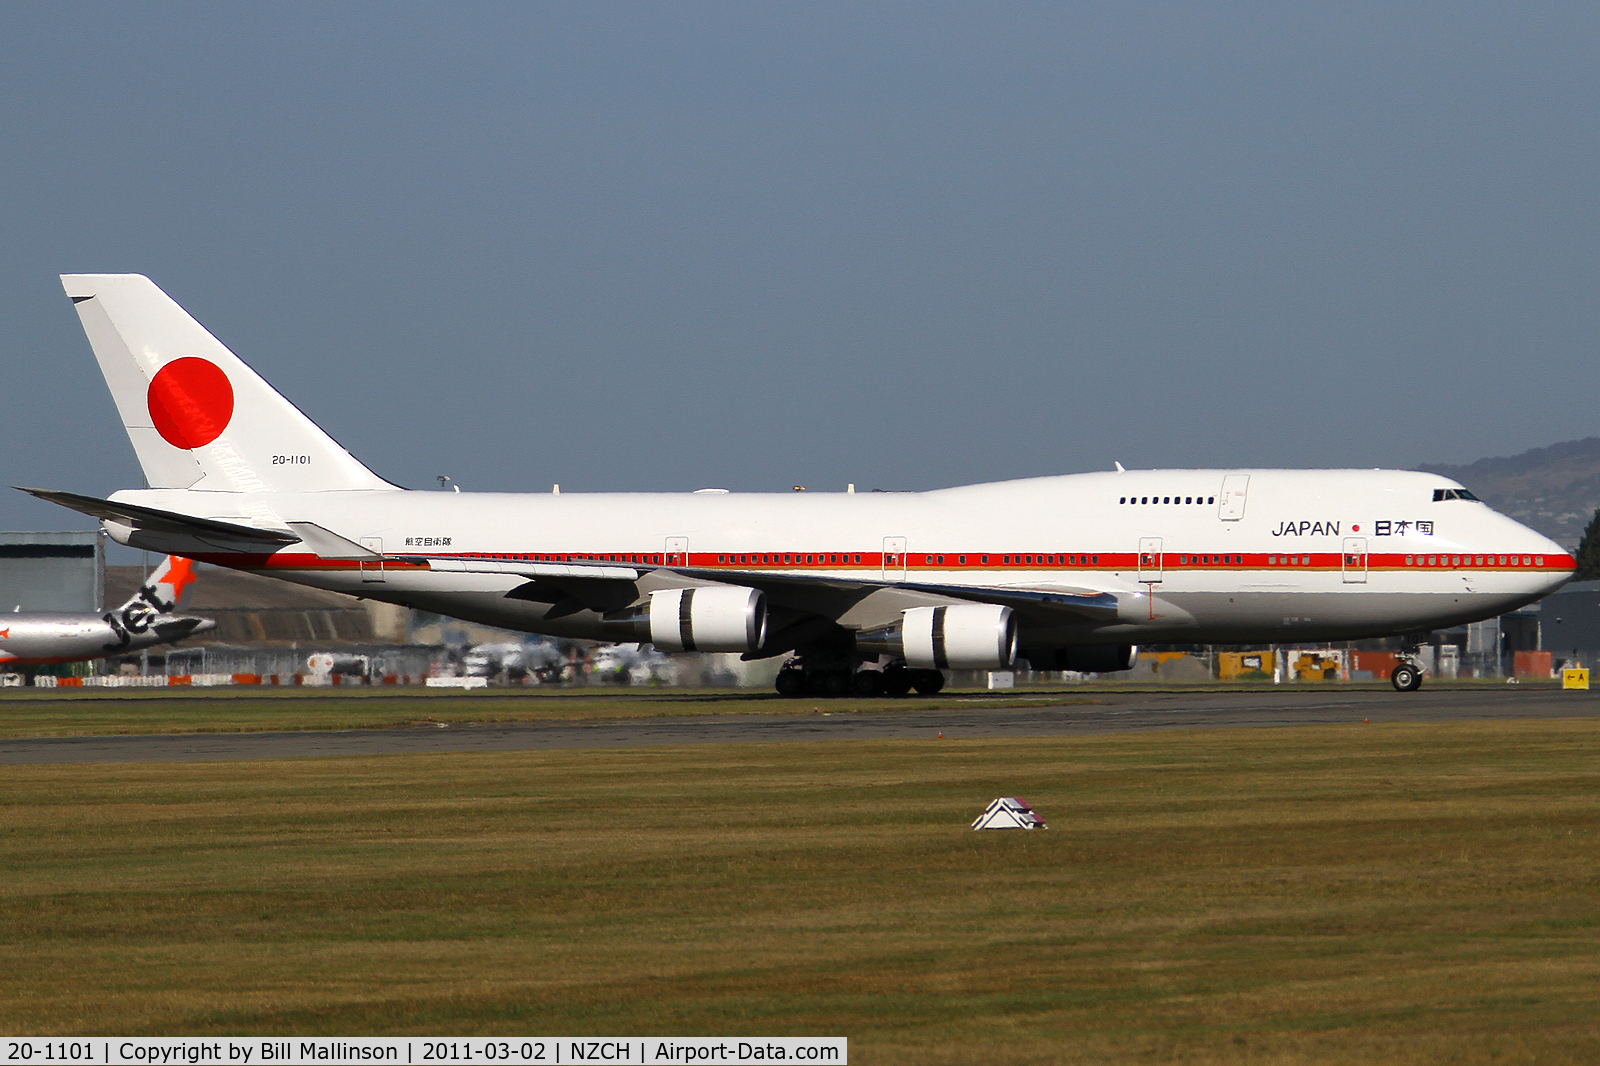 20-1101, 1990 Boeing 747-47C C/N 24730, the Japanese equivalent of Air Force One